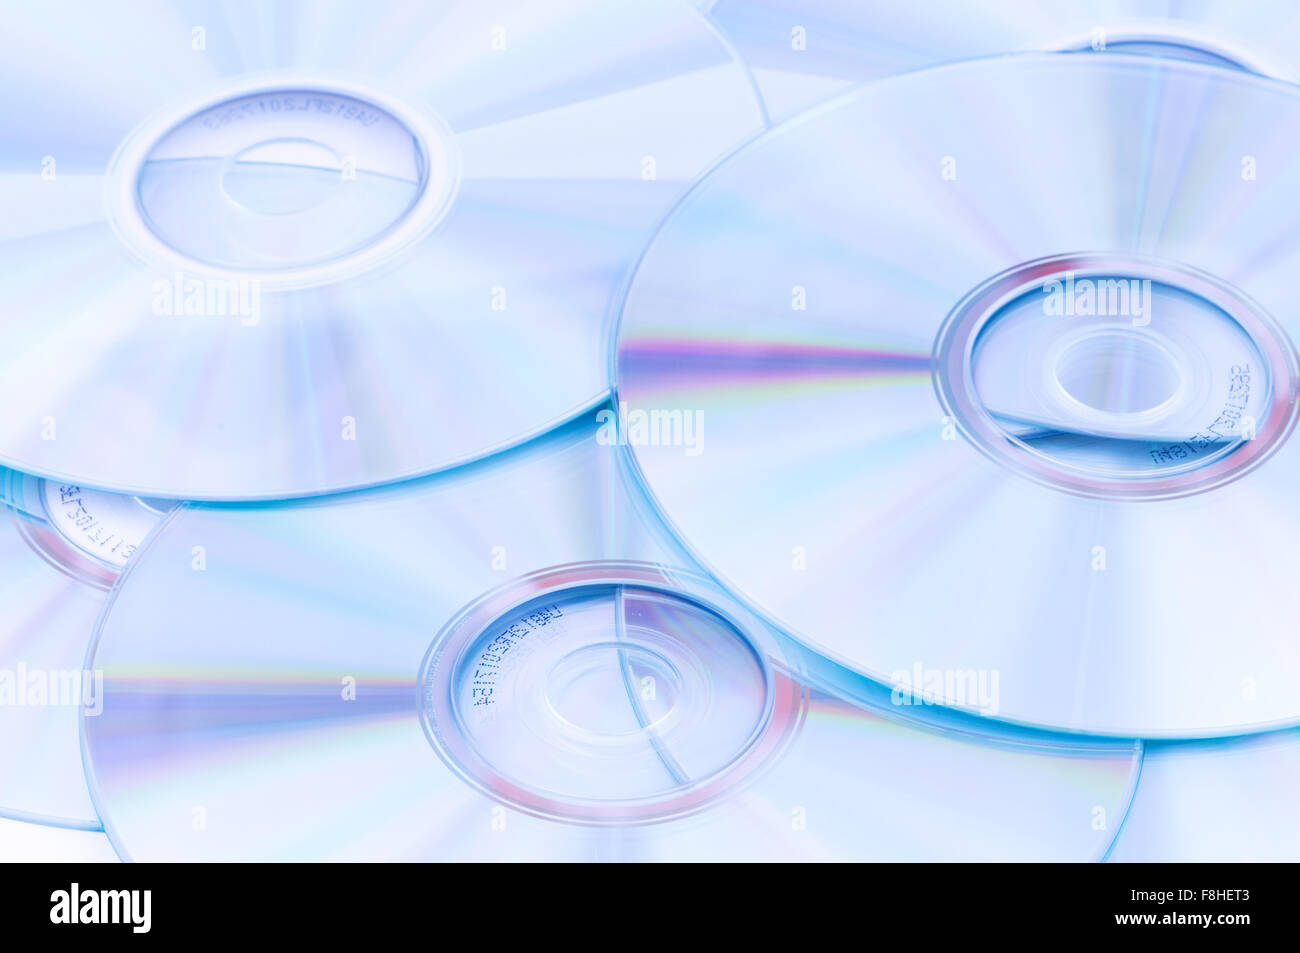 CD discks arranged at the background Stock Photo